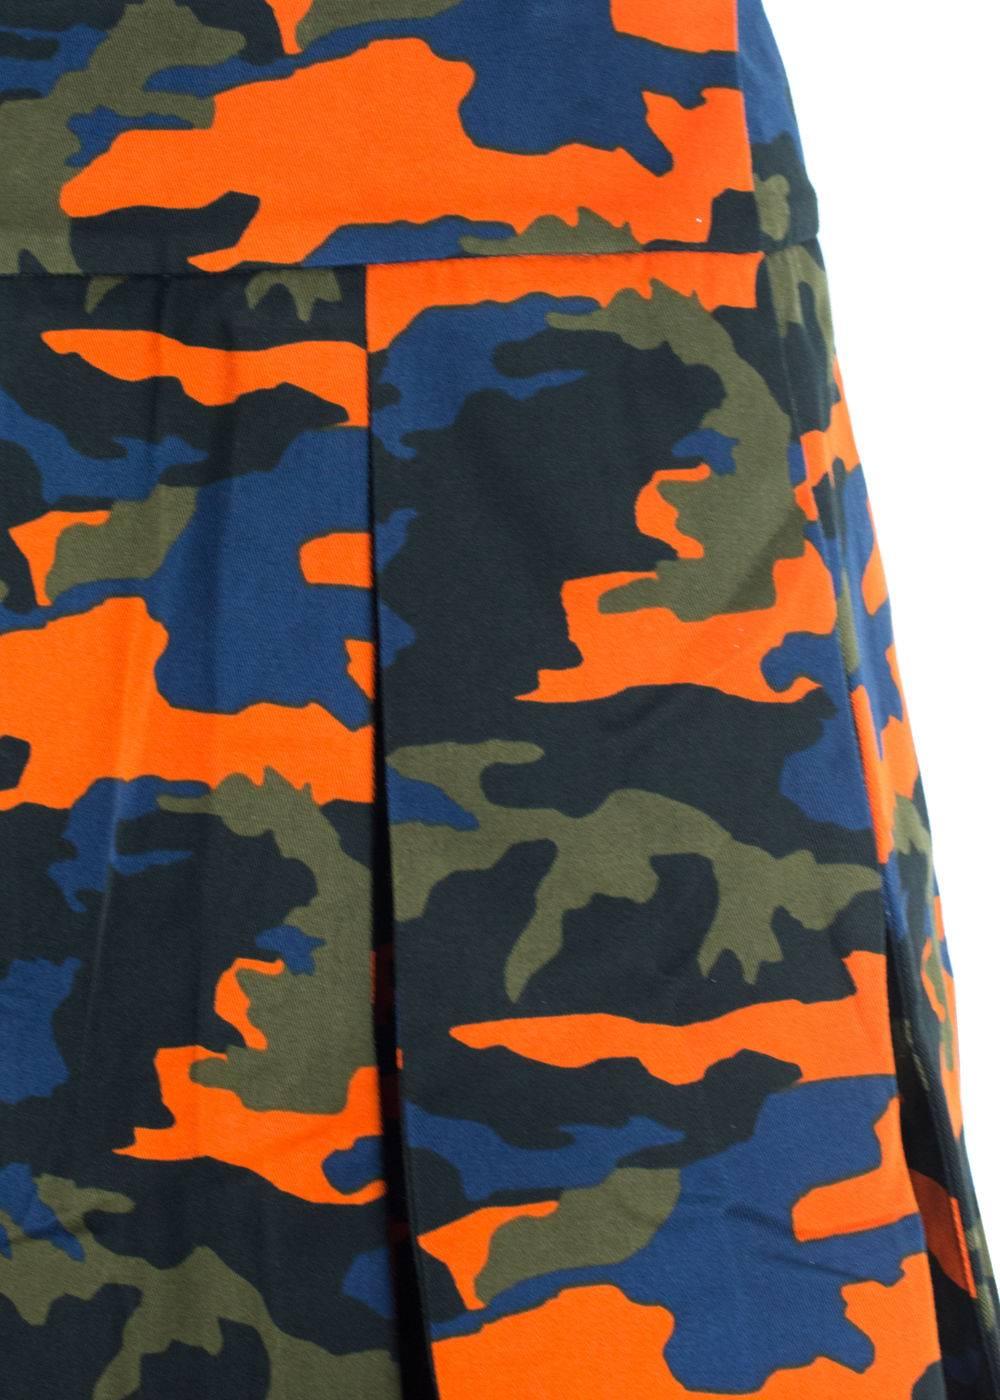 Brand New with Original Tag
Retails in Stores and Online $795
Size euro 48 US XS

If you have the balls to wear this then this is the one for you. Givenchy provides the Camouflage Kilt that every person dreams of wearing but never does. Combination